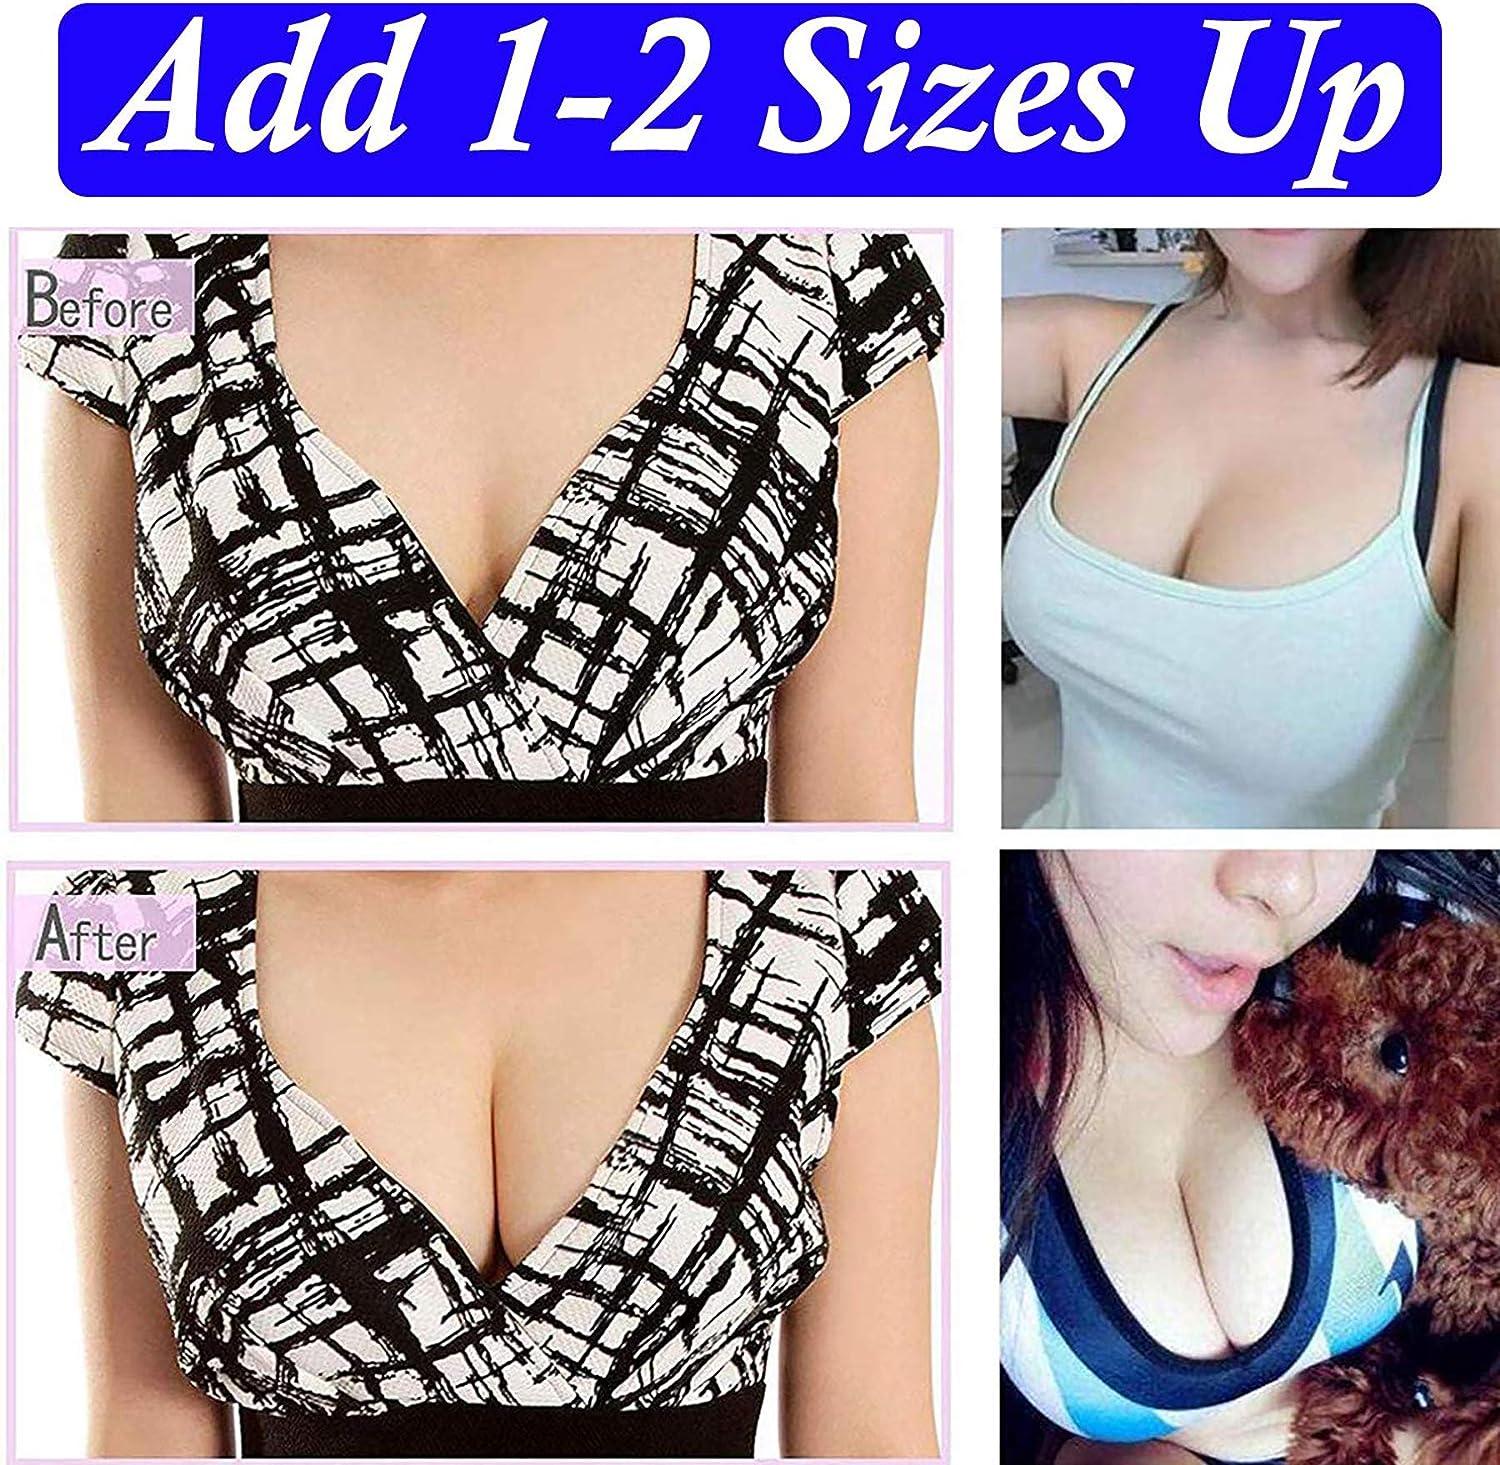 Silicone Chicken Cutlets Bra Inserts - Clear Breast Pads Chest Push Up &  Firming Bust Enhancers Padding for Summer Bikini